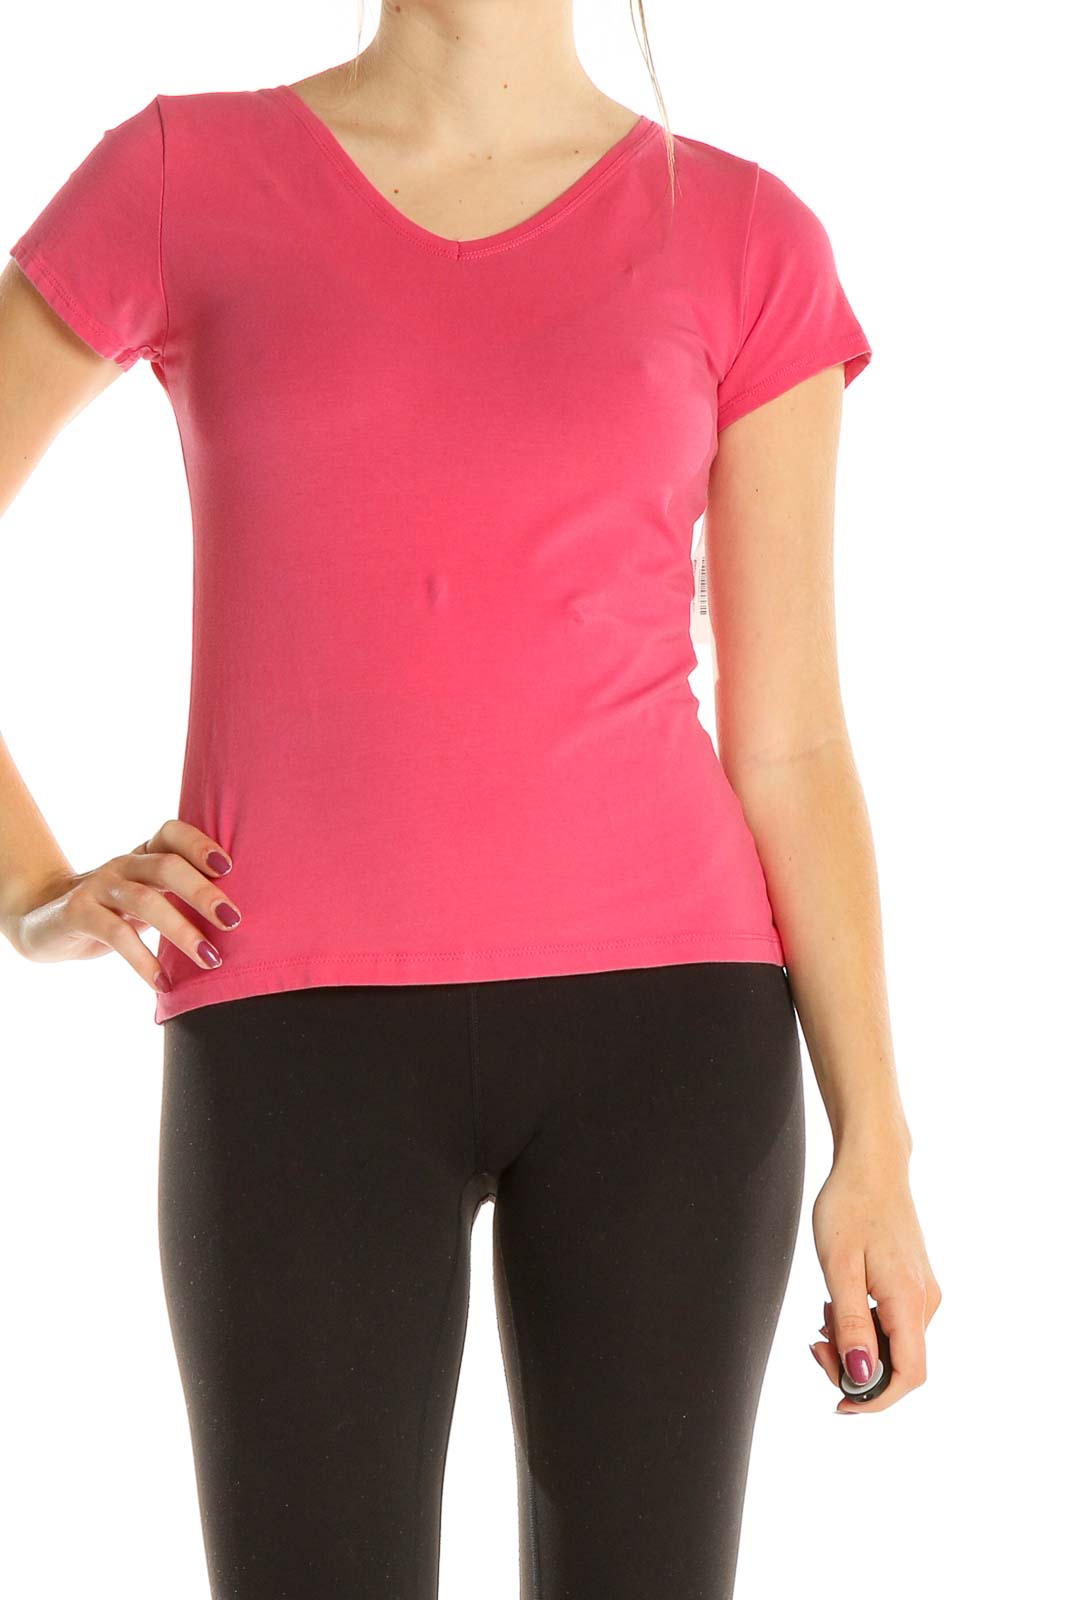 Pink T-Shirt Front